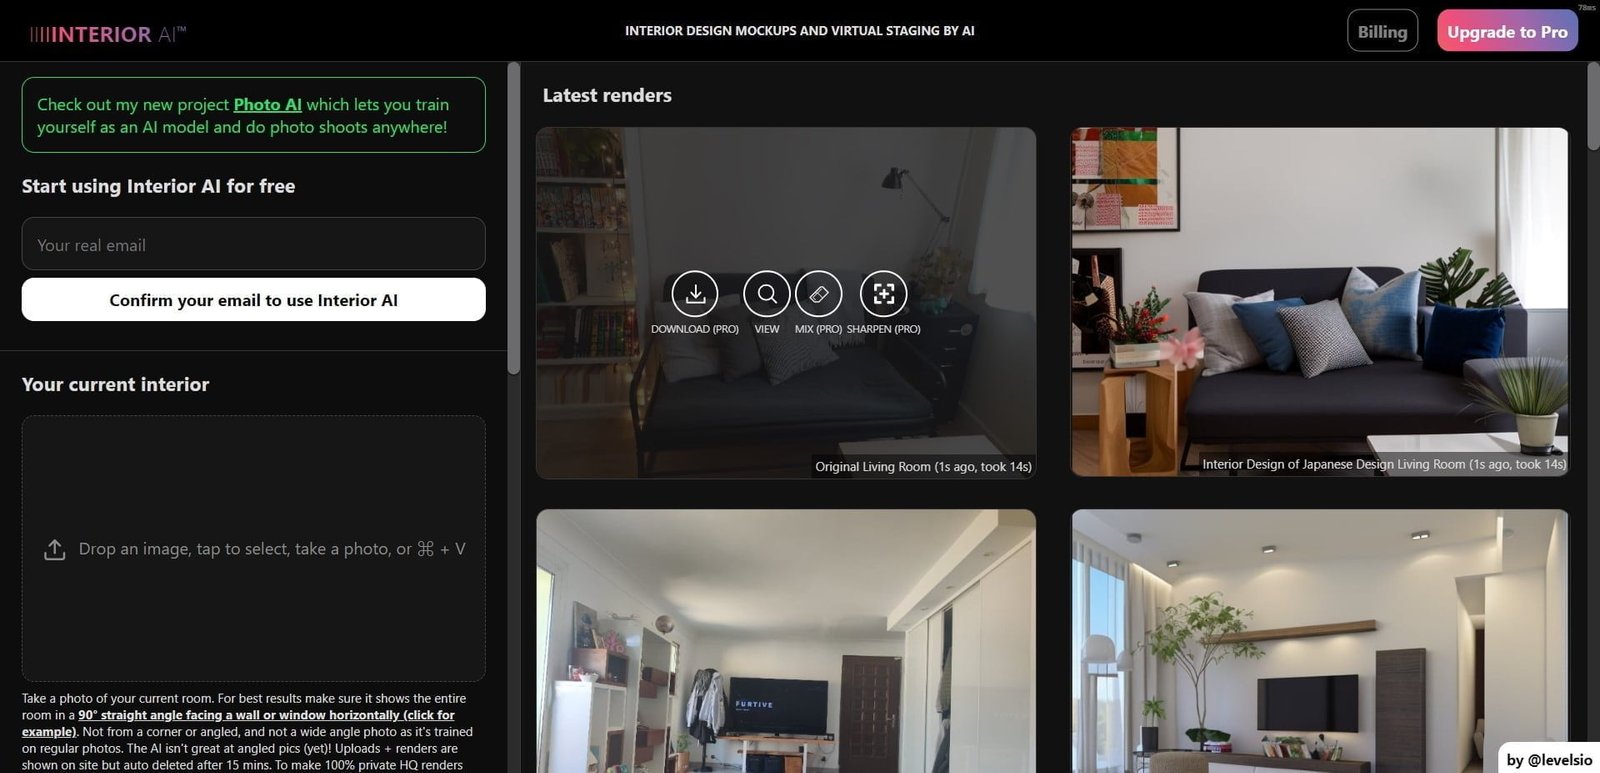 Interior AI is an AI-powered website that enables users to create fresh looks for their rooms and even new features for their interior spaces.